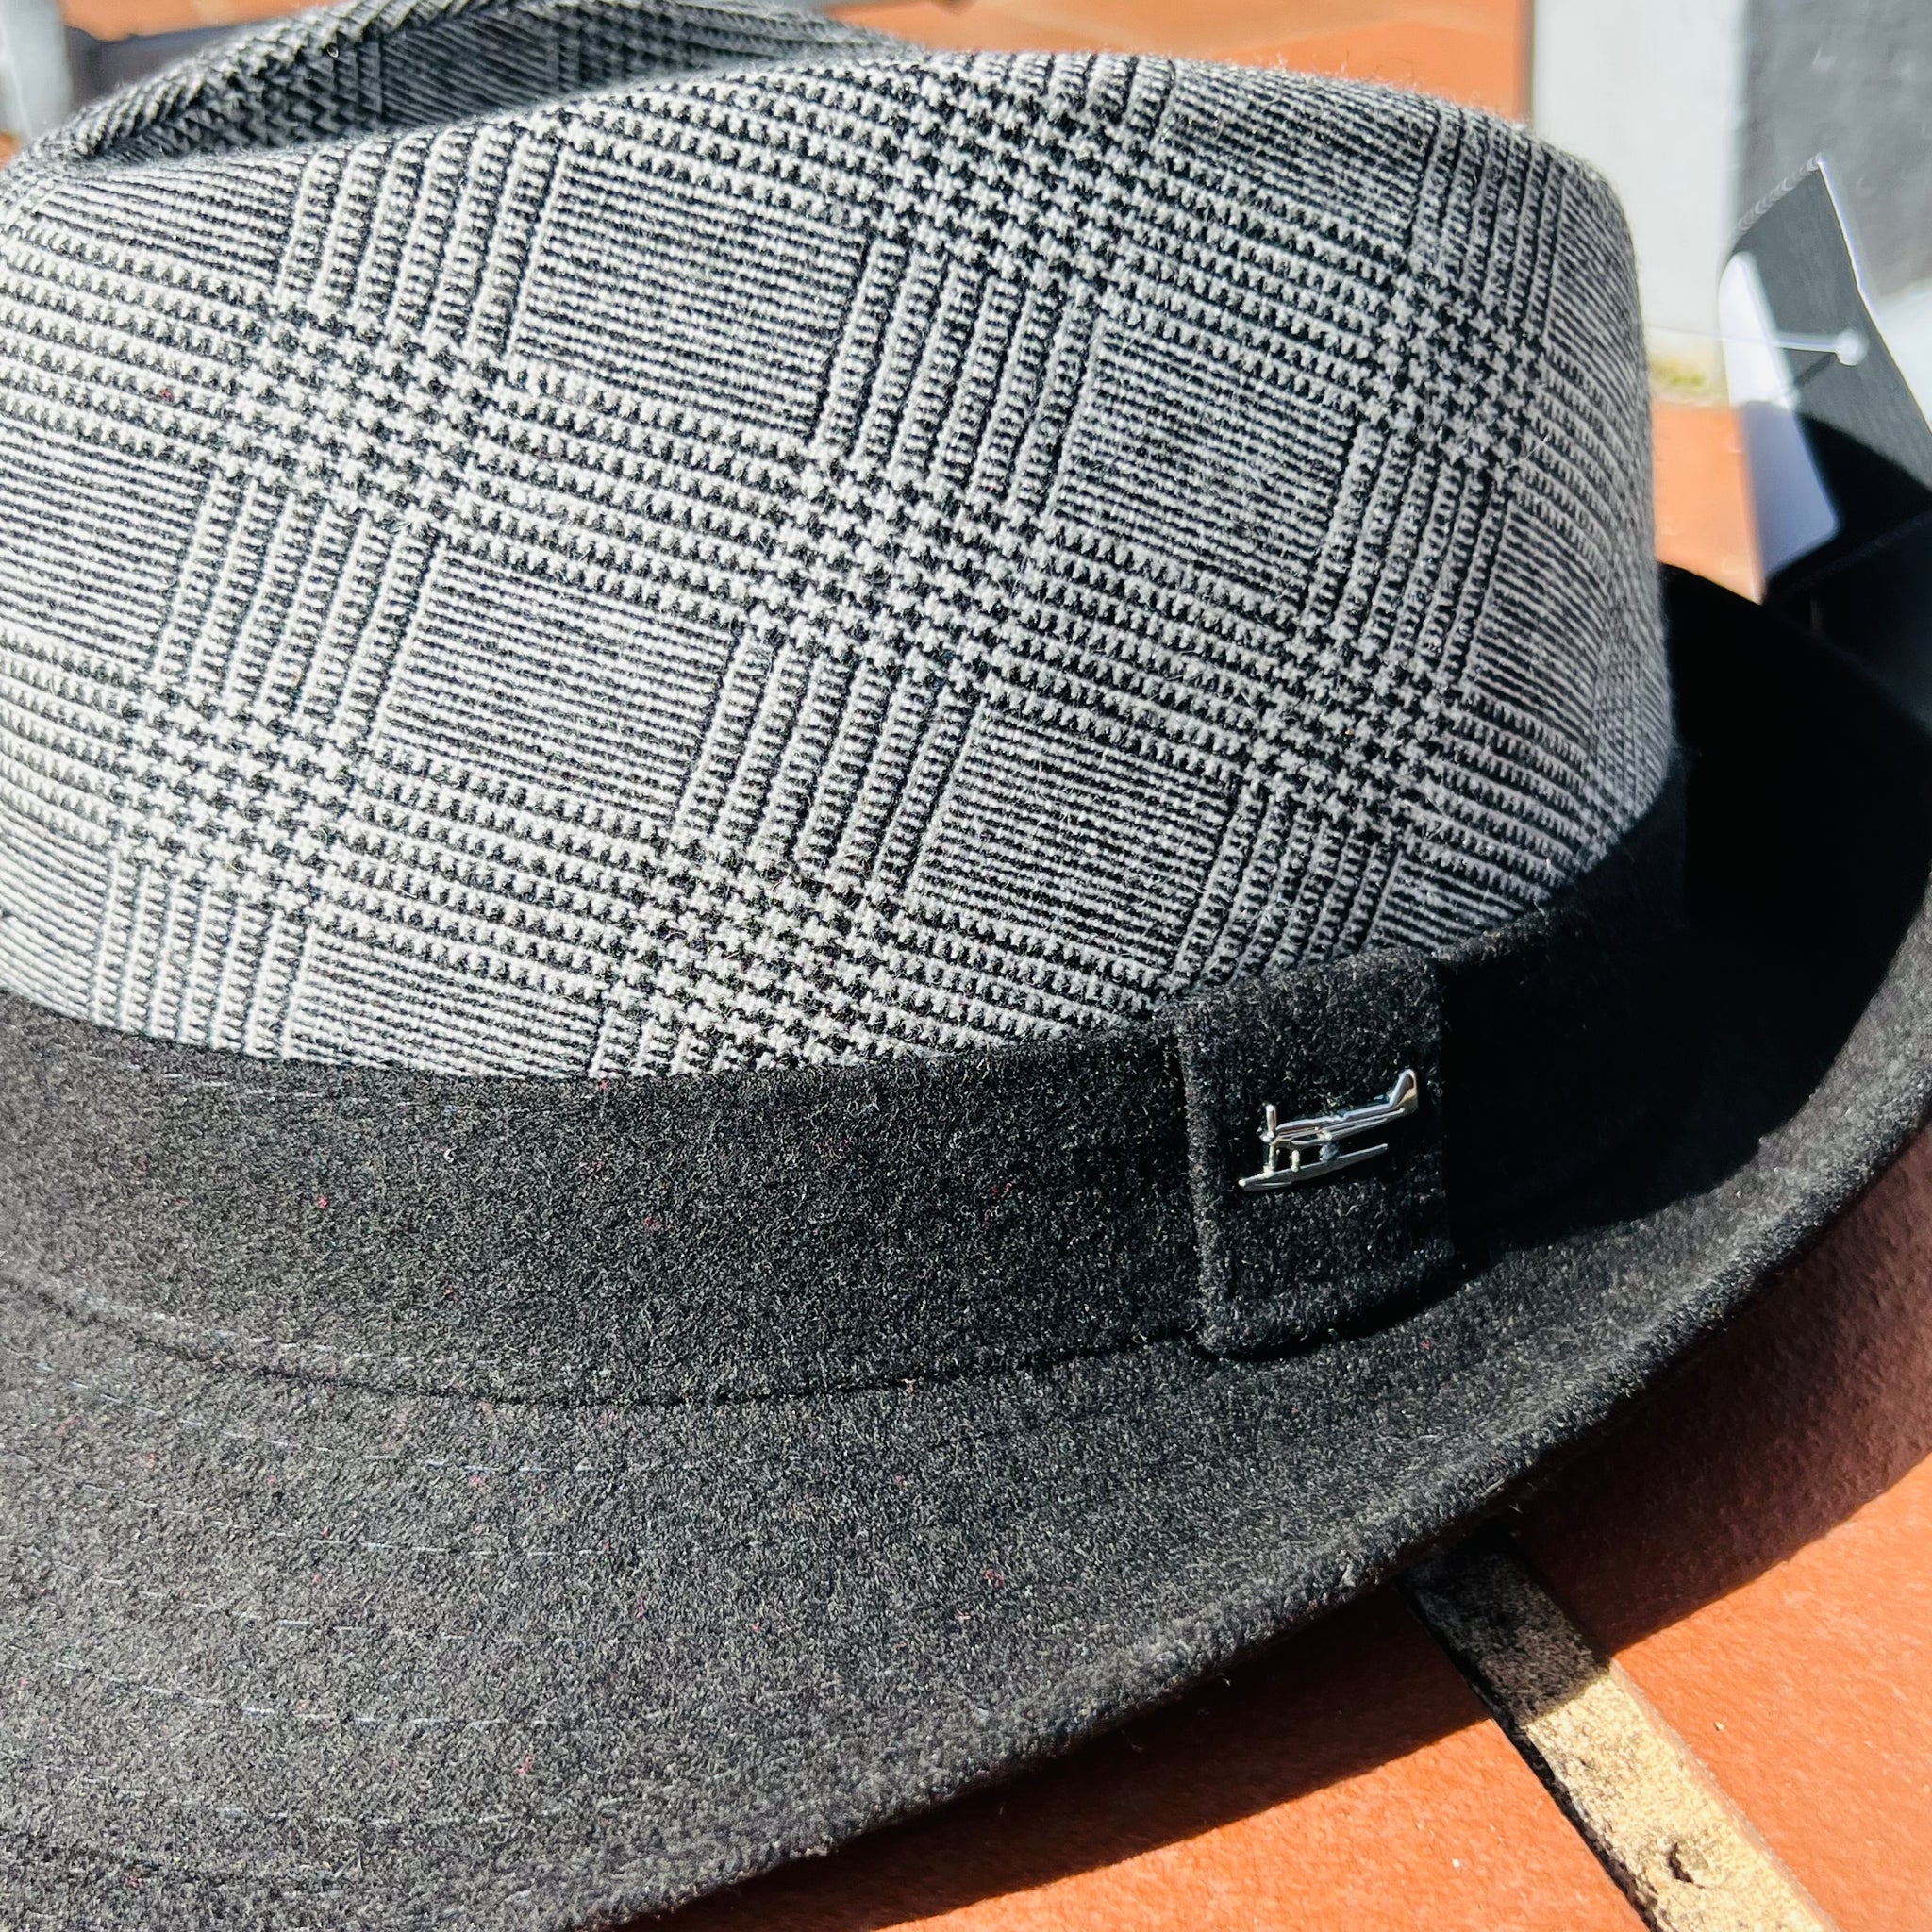 Prince of Wales Check Trilby Hat